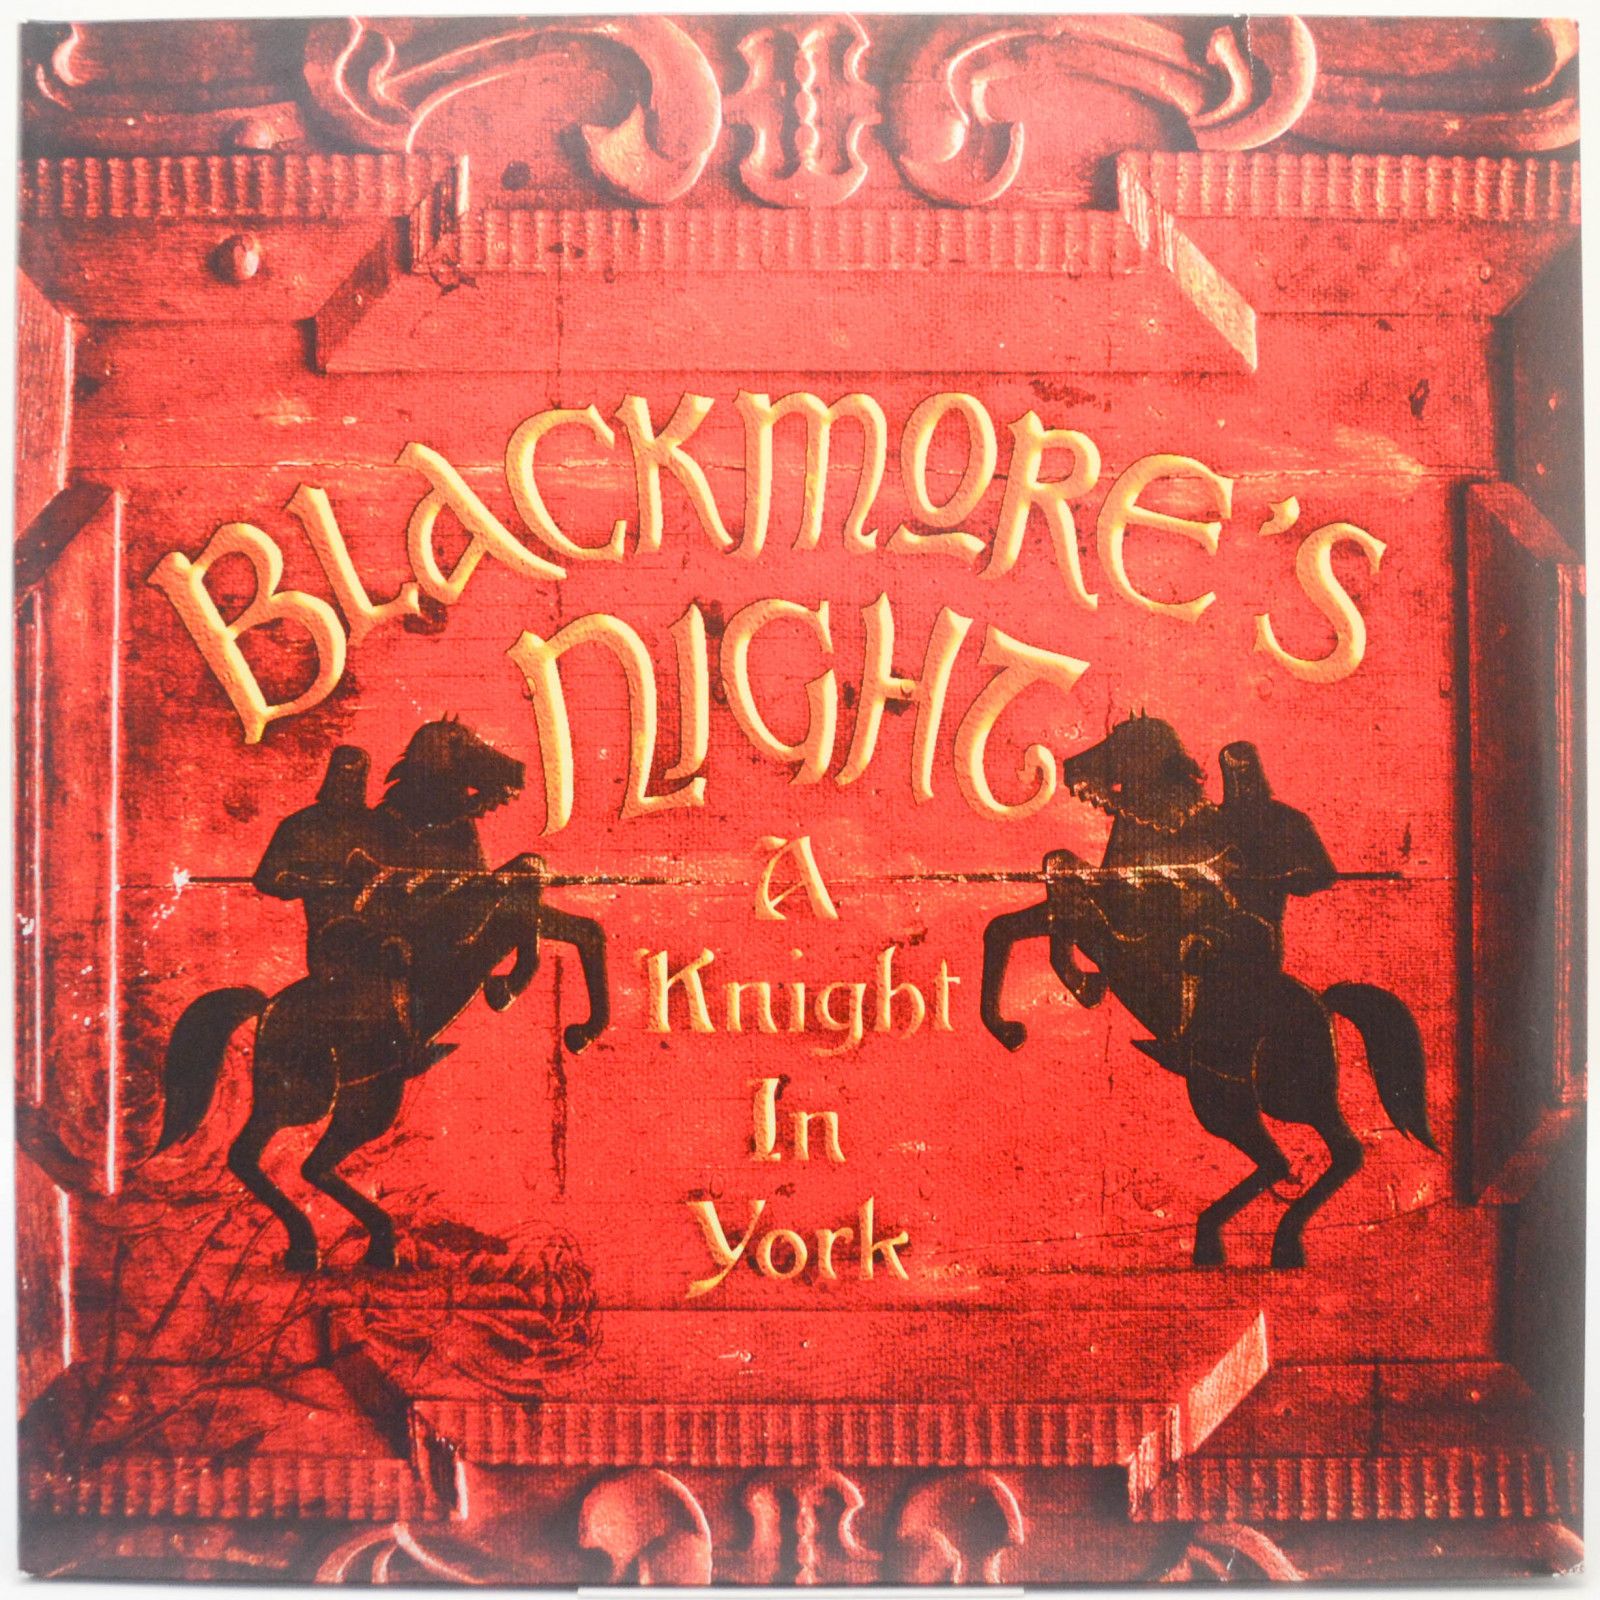 Blackmore's Night — A Knight In York (2LP), 2012